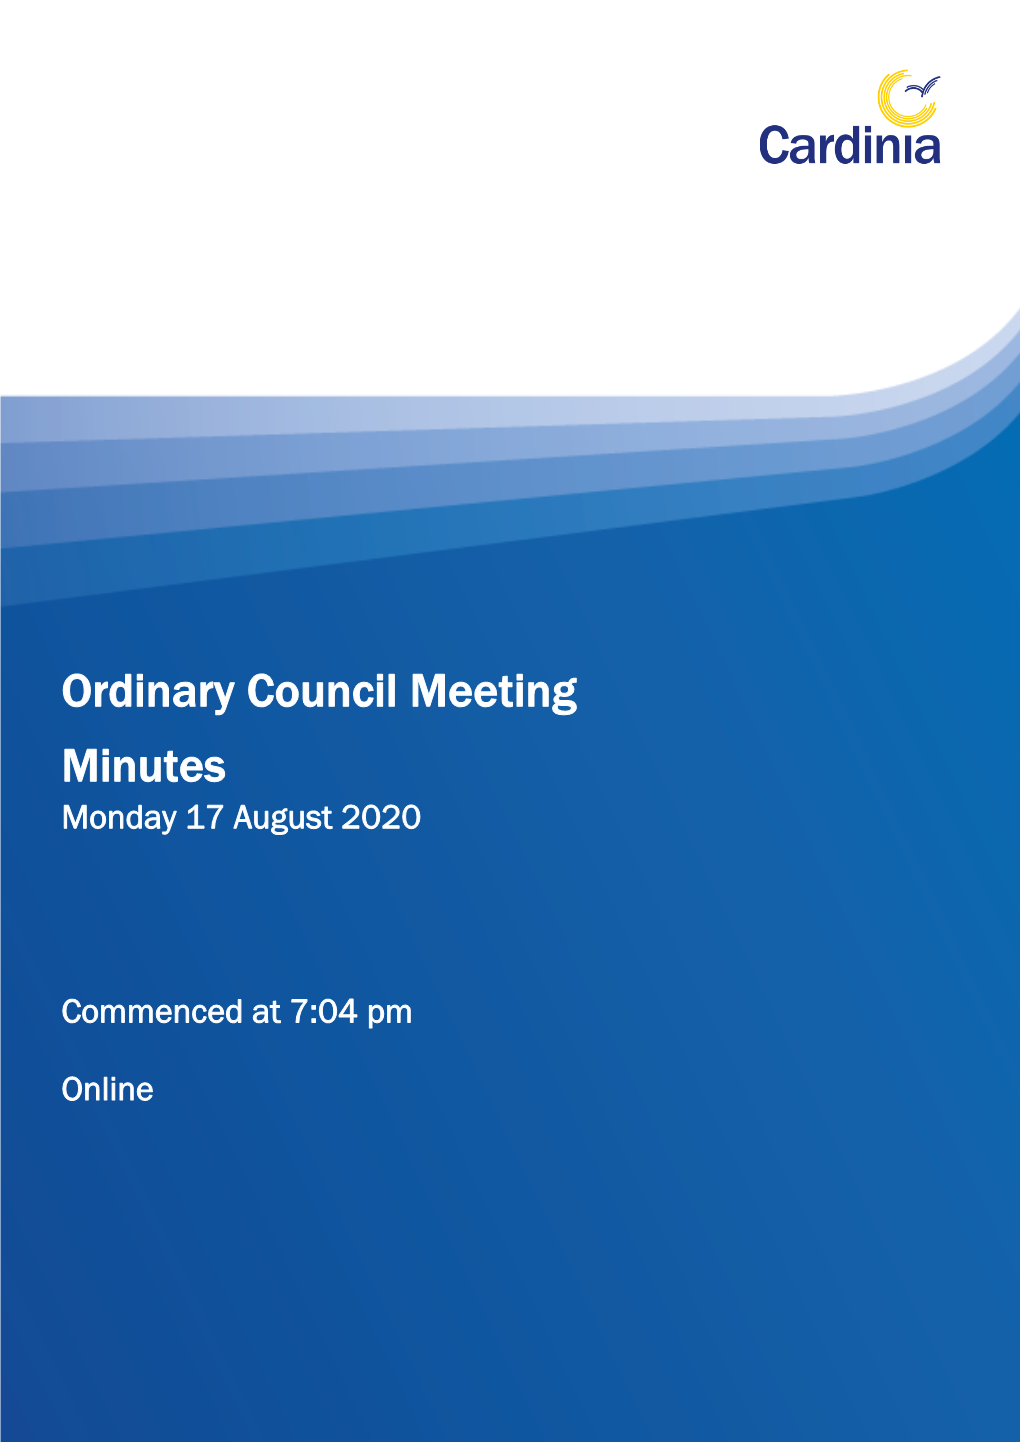 Ordinary Council Meeting Minutes Monday 17 August 2020